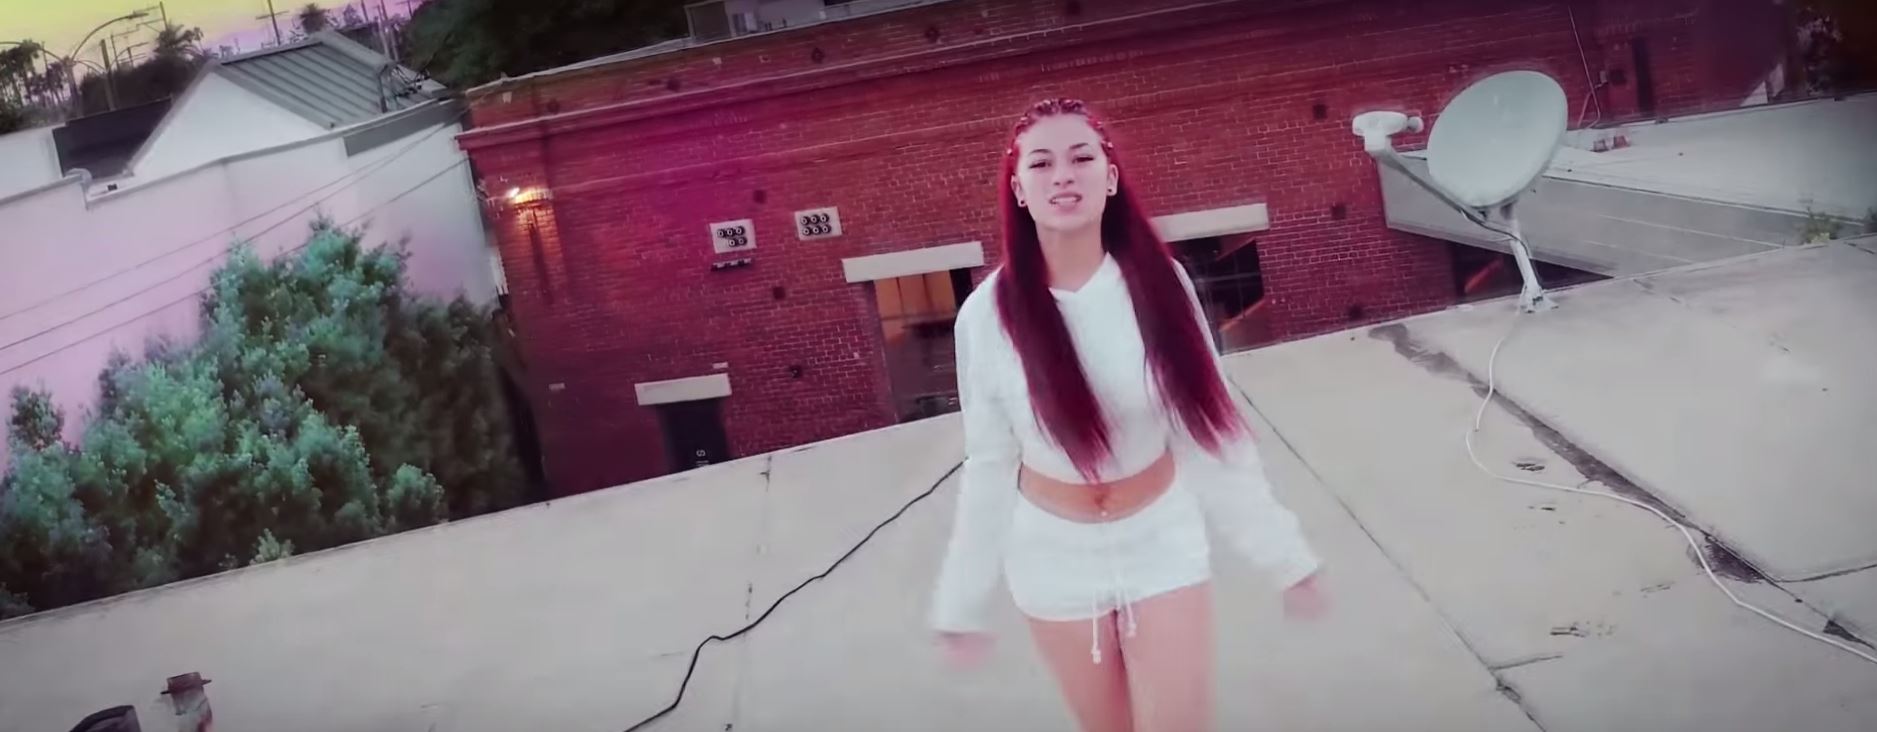 Cash Me Ousside Girl Has Dropped A Music Video On YouTube